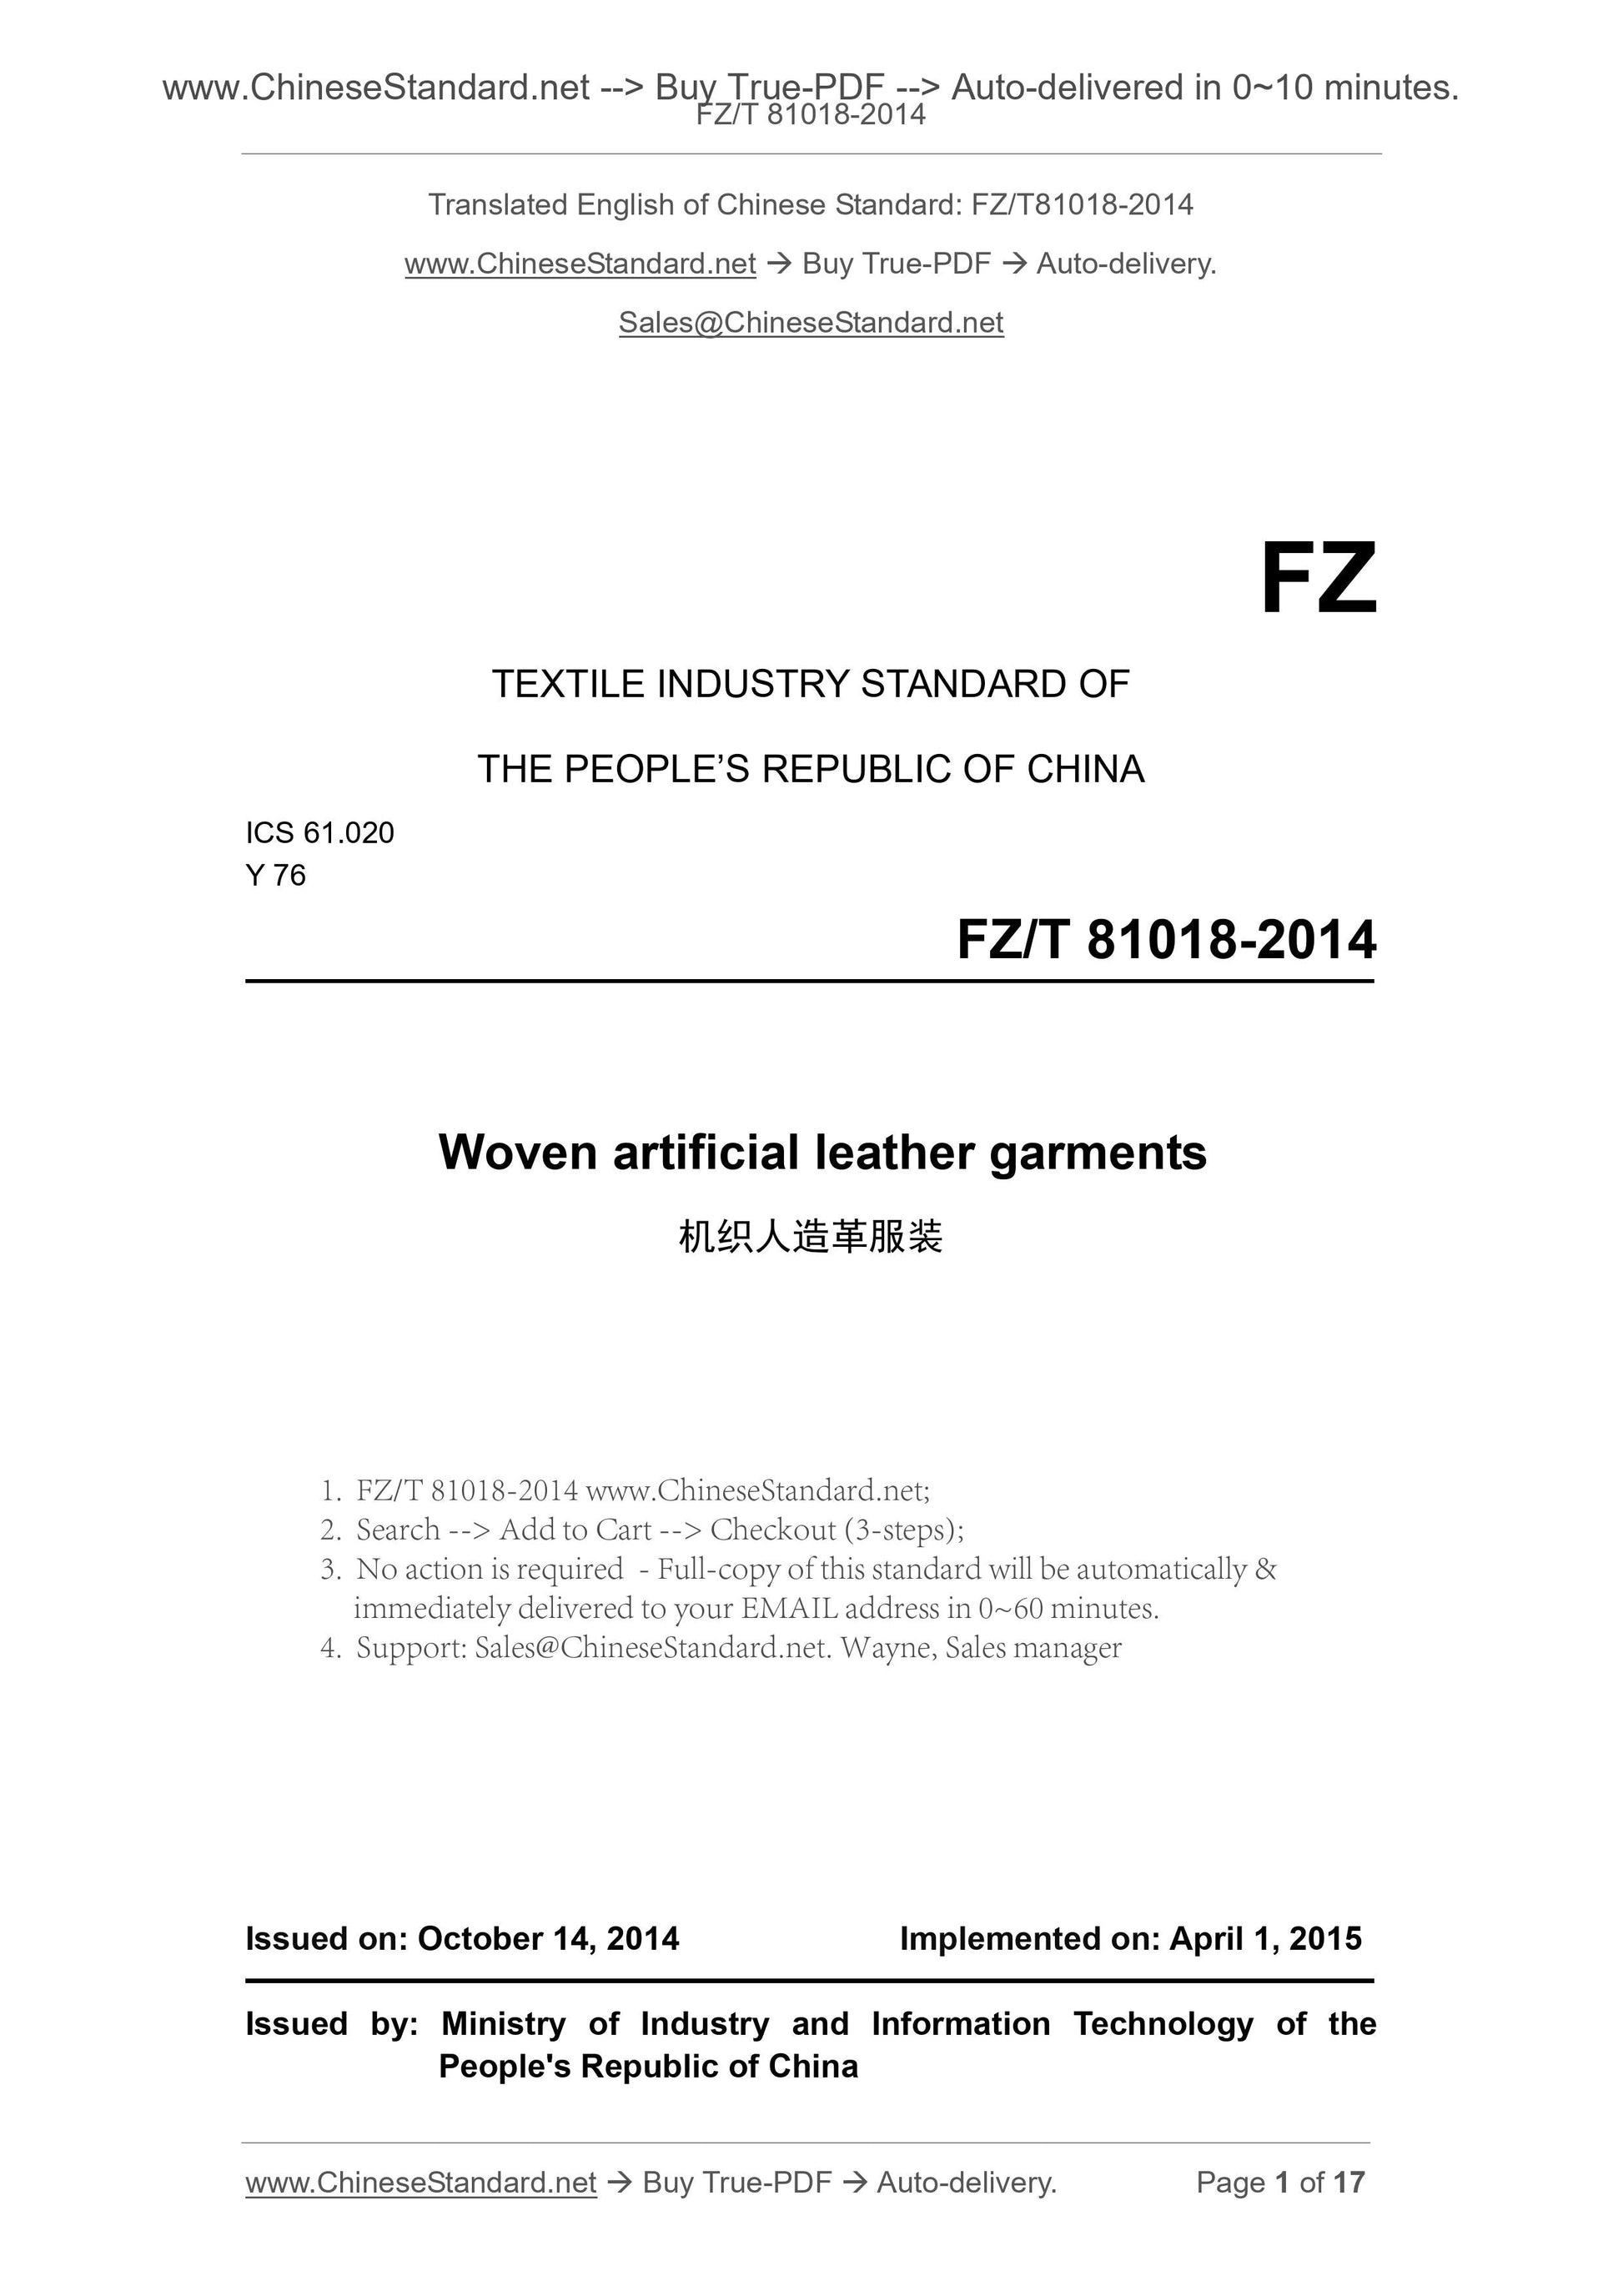 FZ/T 81018-2014 Page 1